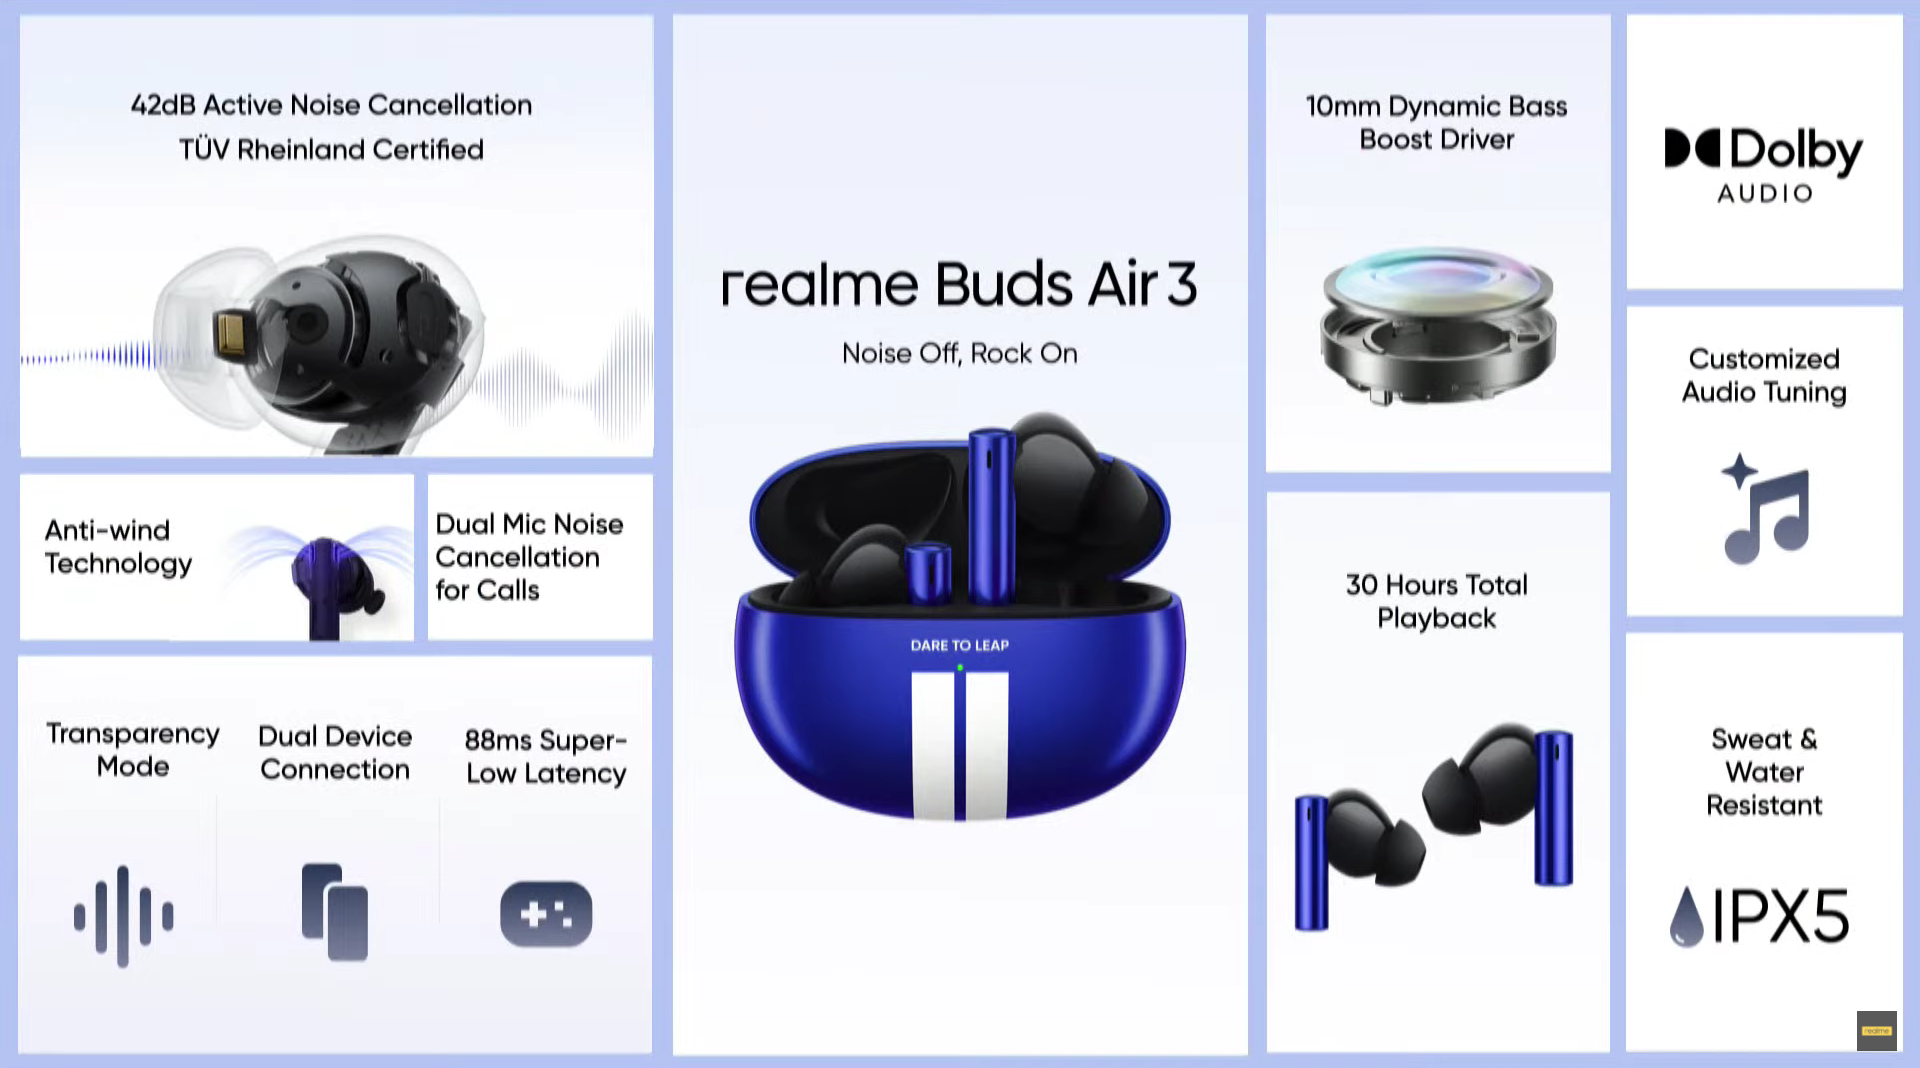 Realme Buds Air 3 Nitro Blue color launched in India for ₹4,999 - Gizmochina